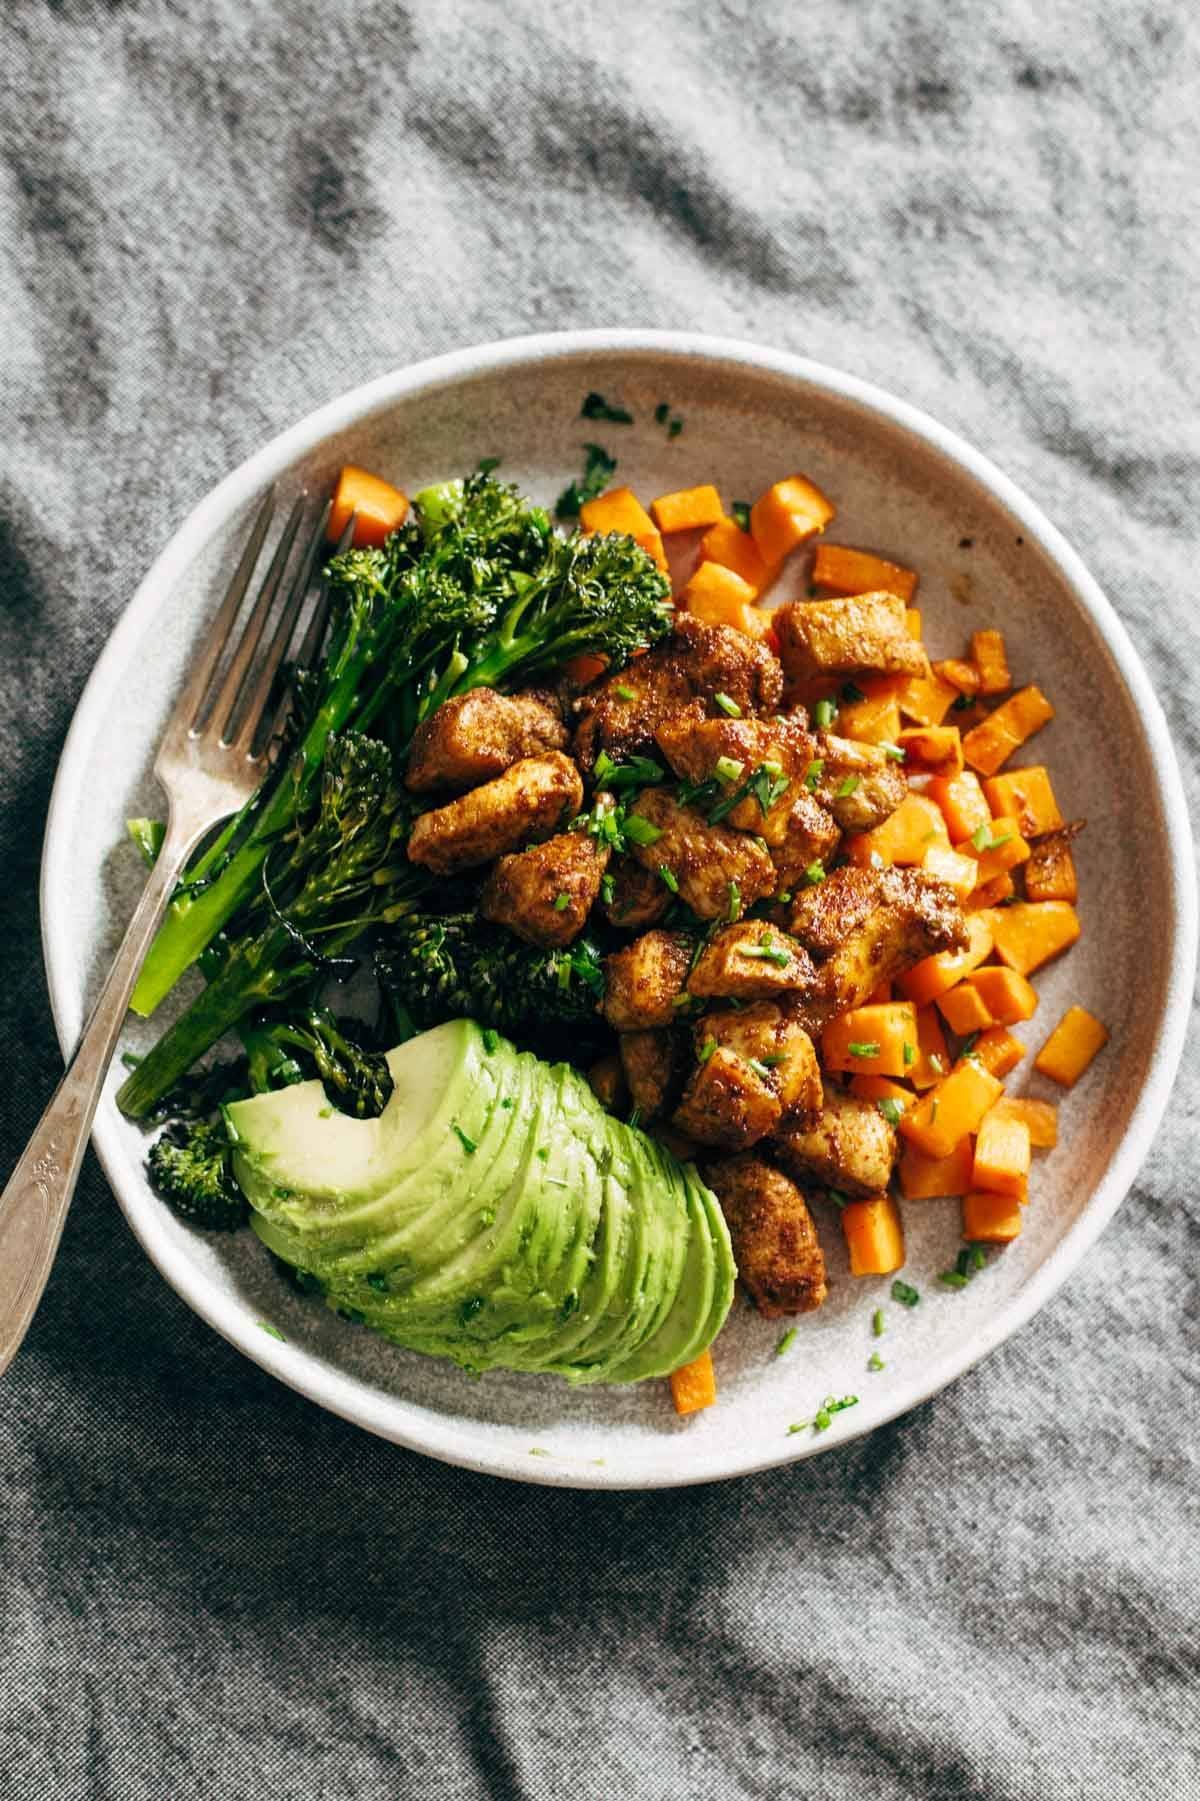 a plate of chicken and sweet potatoes with avocado and broccoli